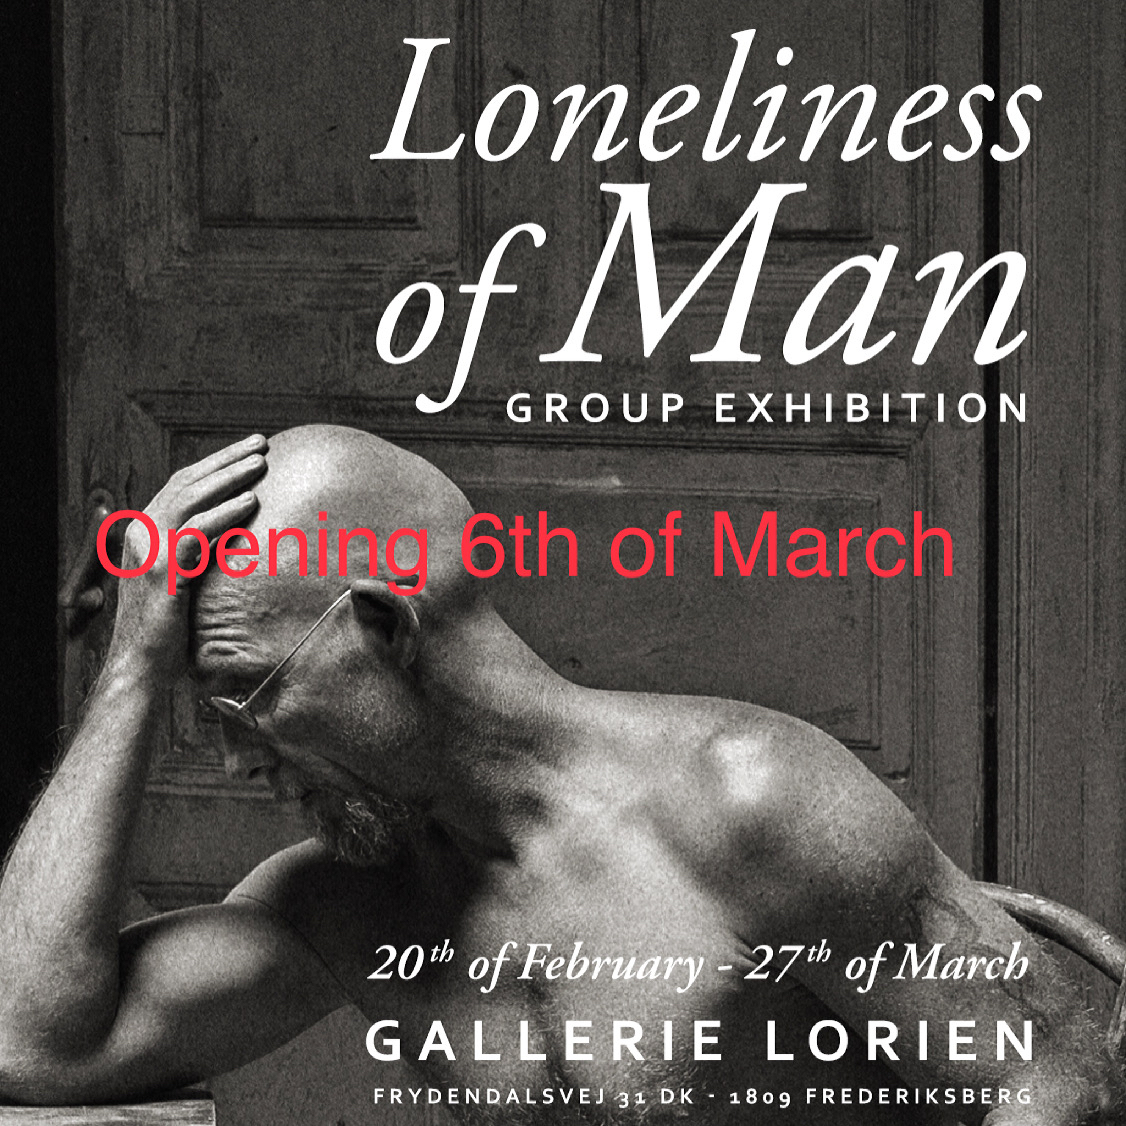 Loneliness of man